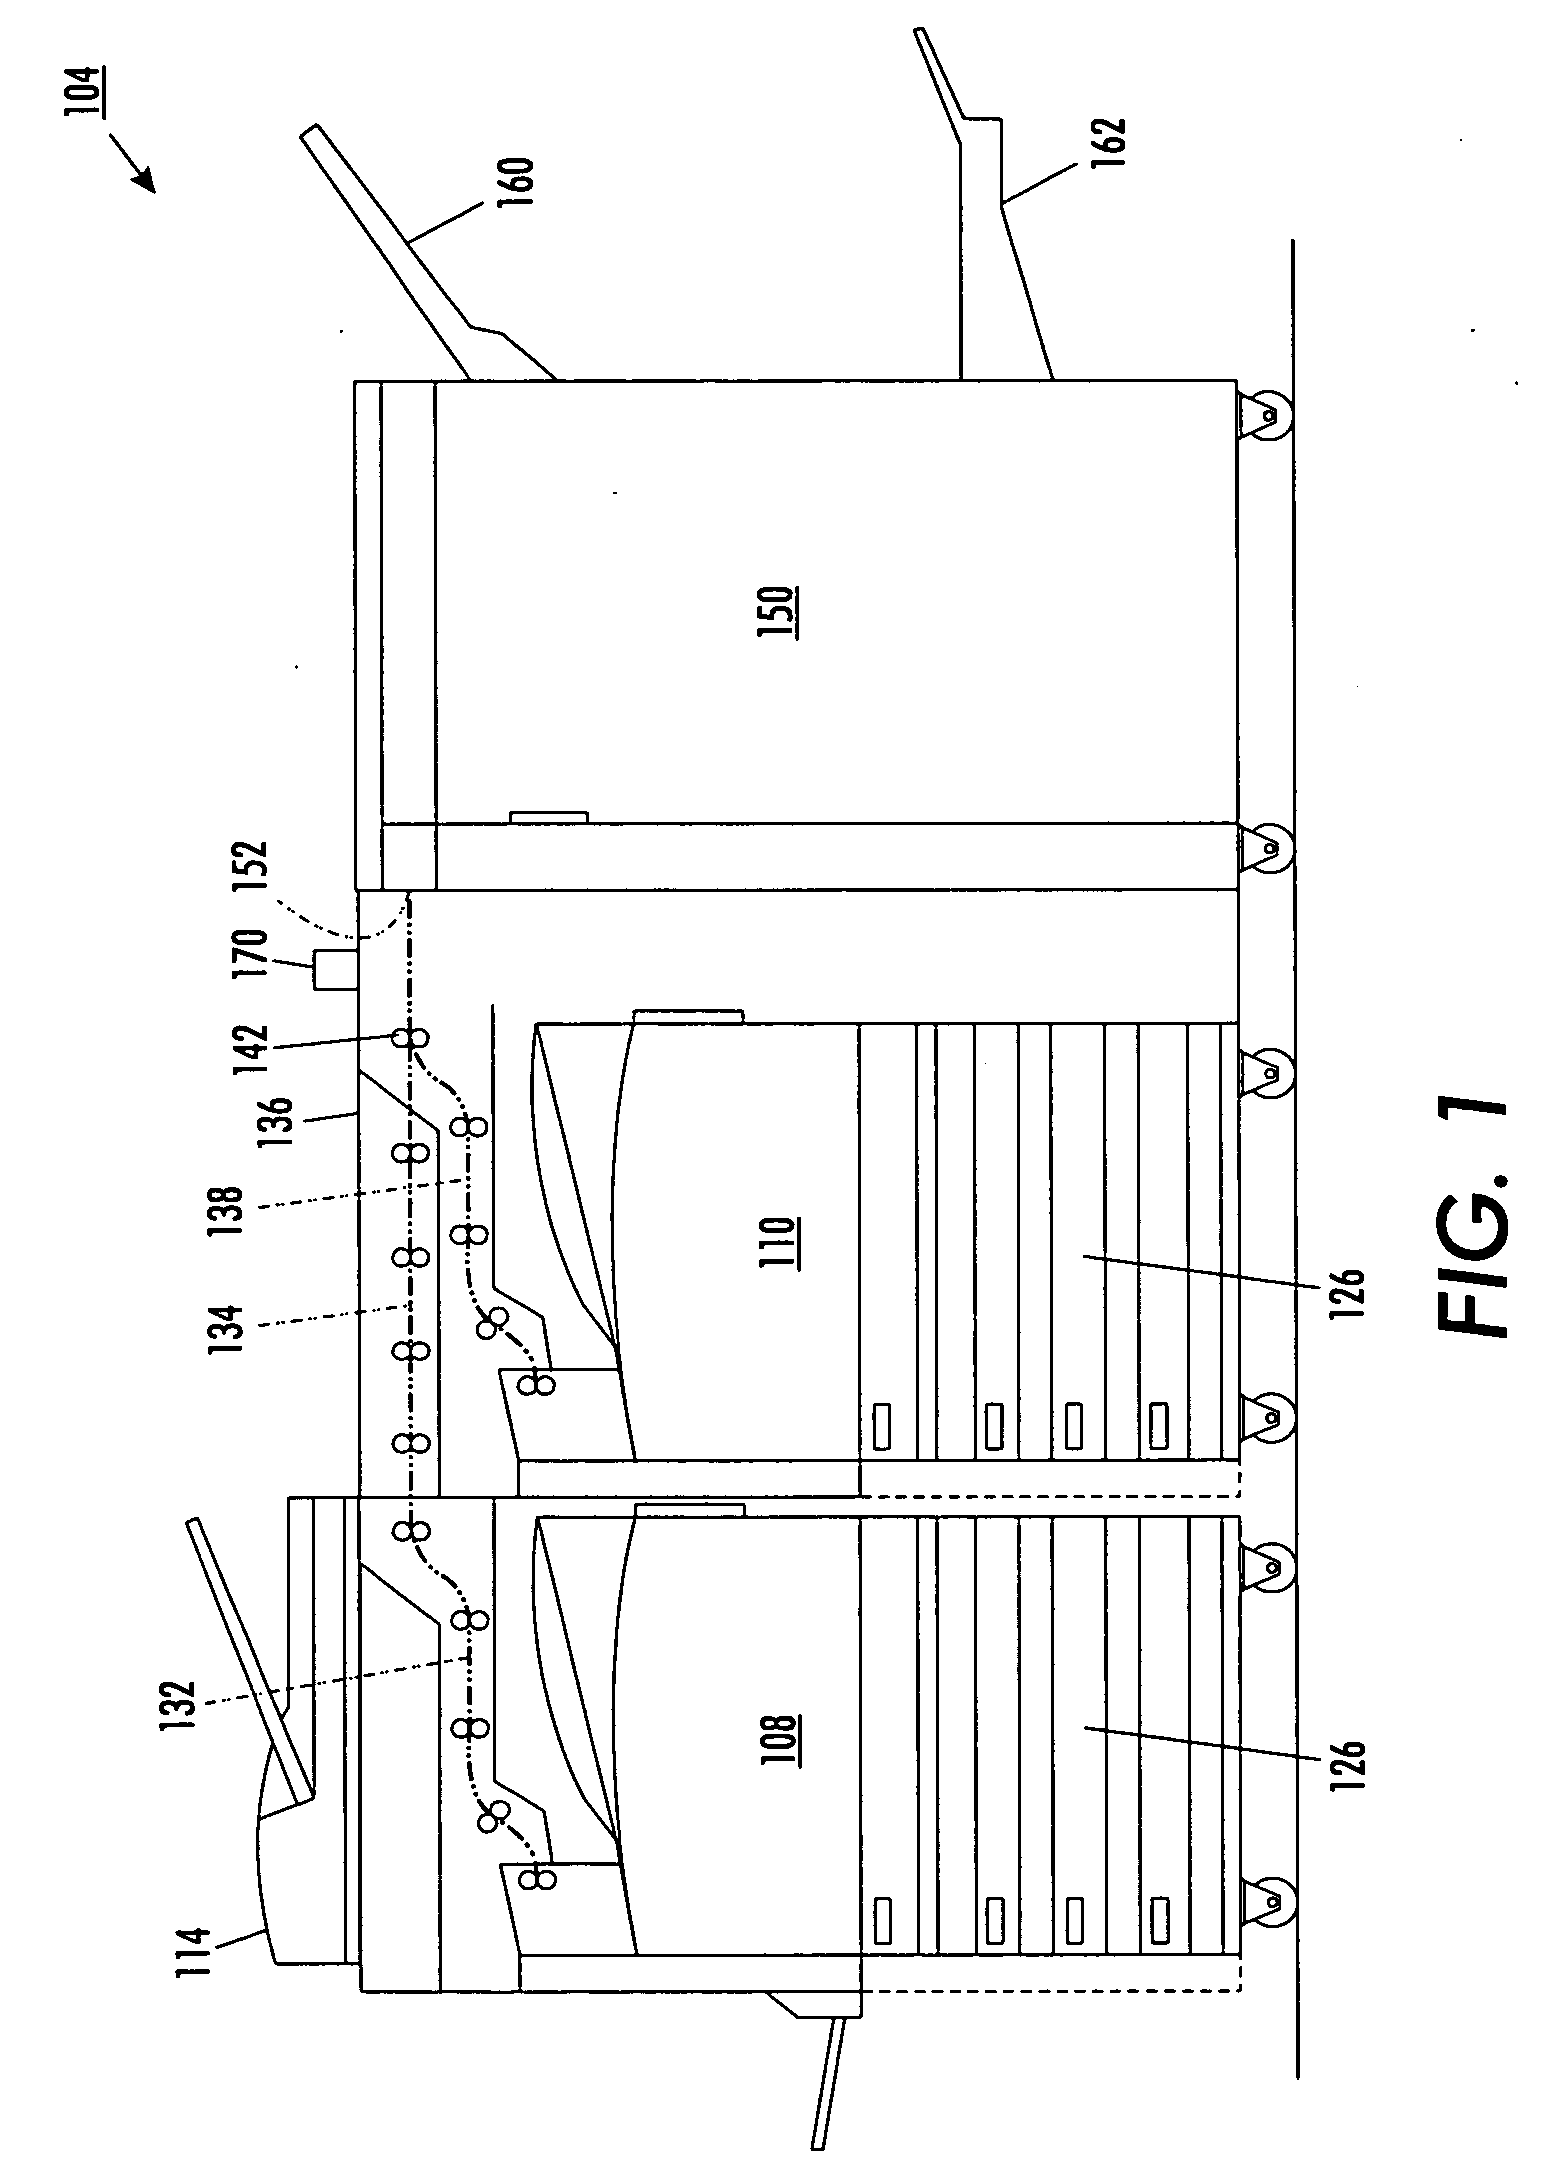 Image quality control method and apparatus for multiple marking engine systems